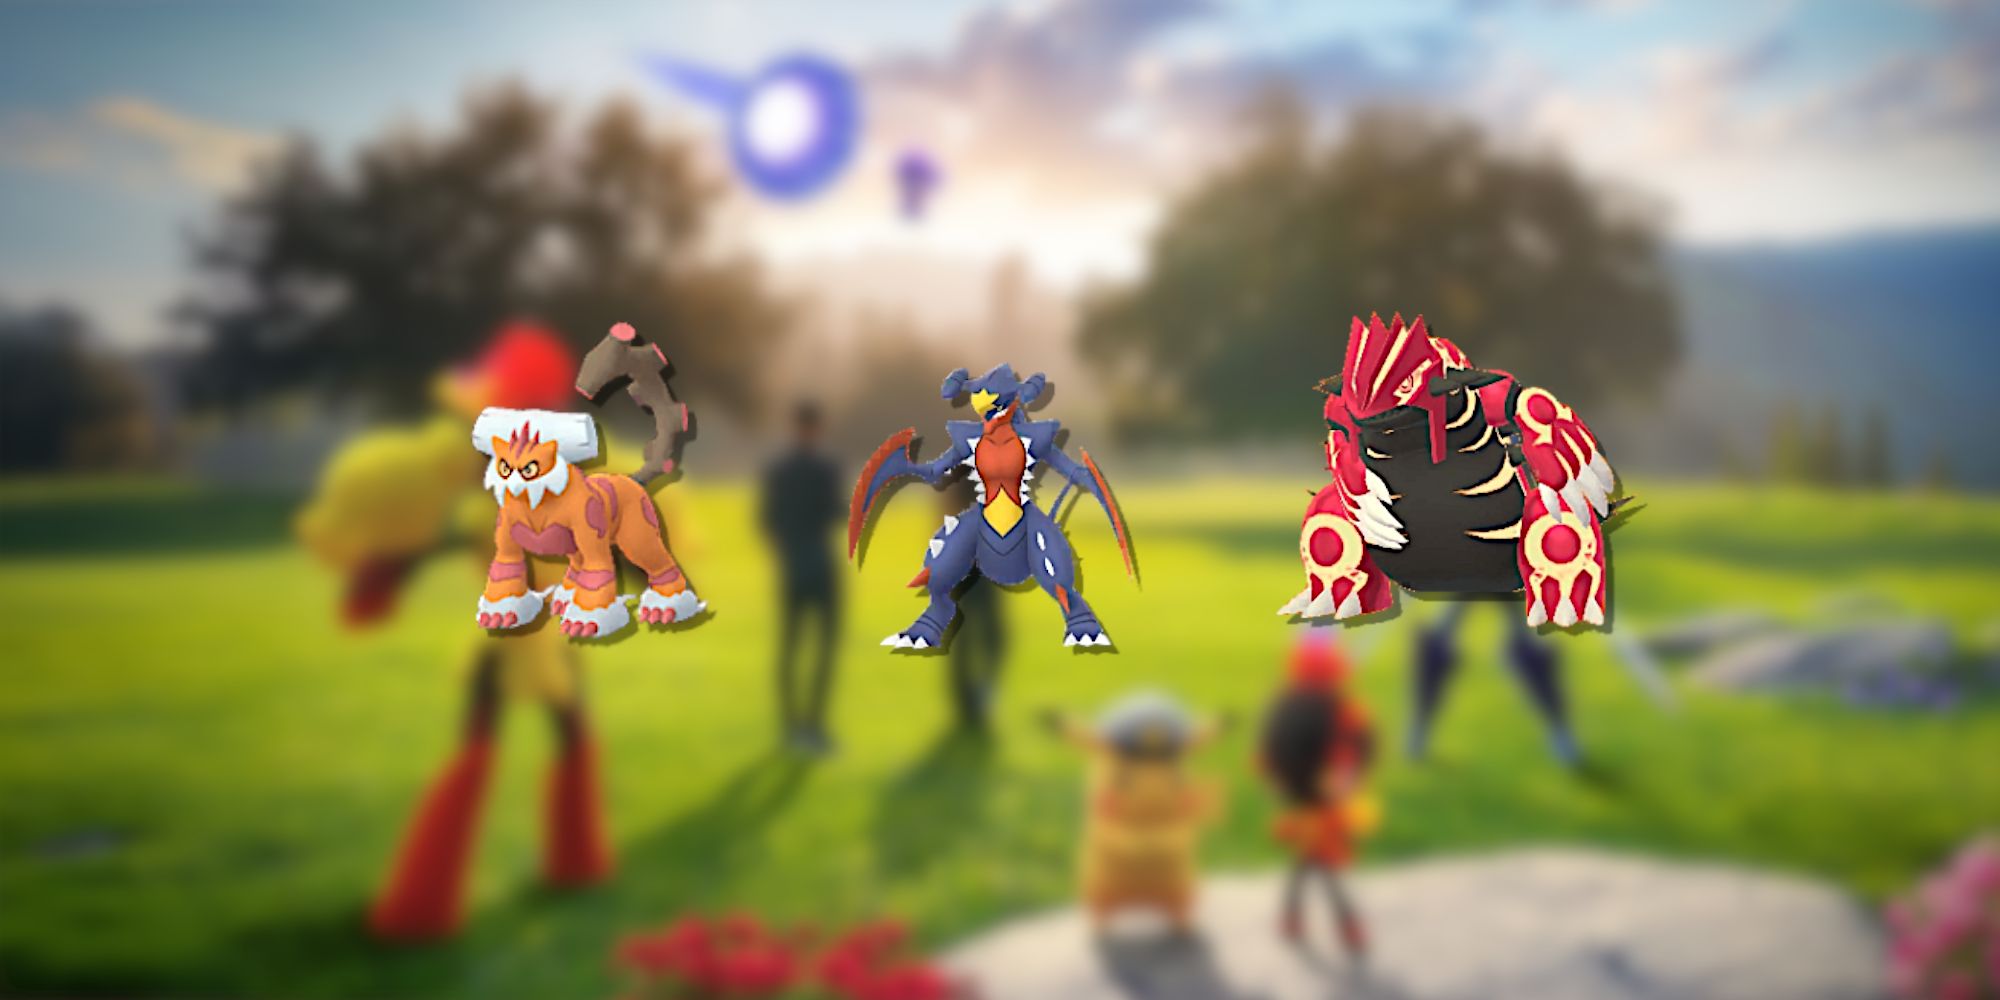 Image of Landorus, Mega Garchomp, and Groudon Primal in the foreground from Pokemon GO